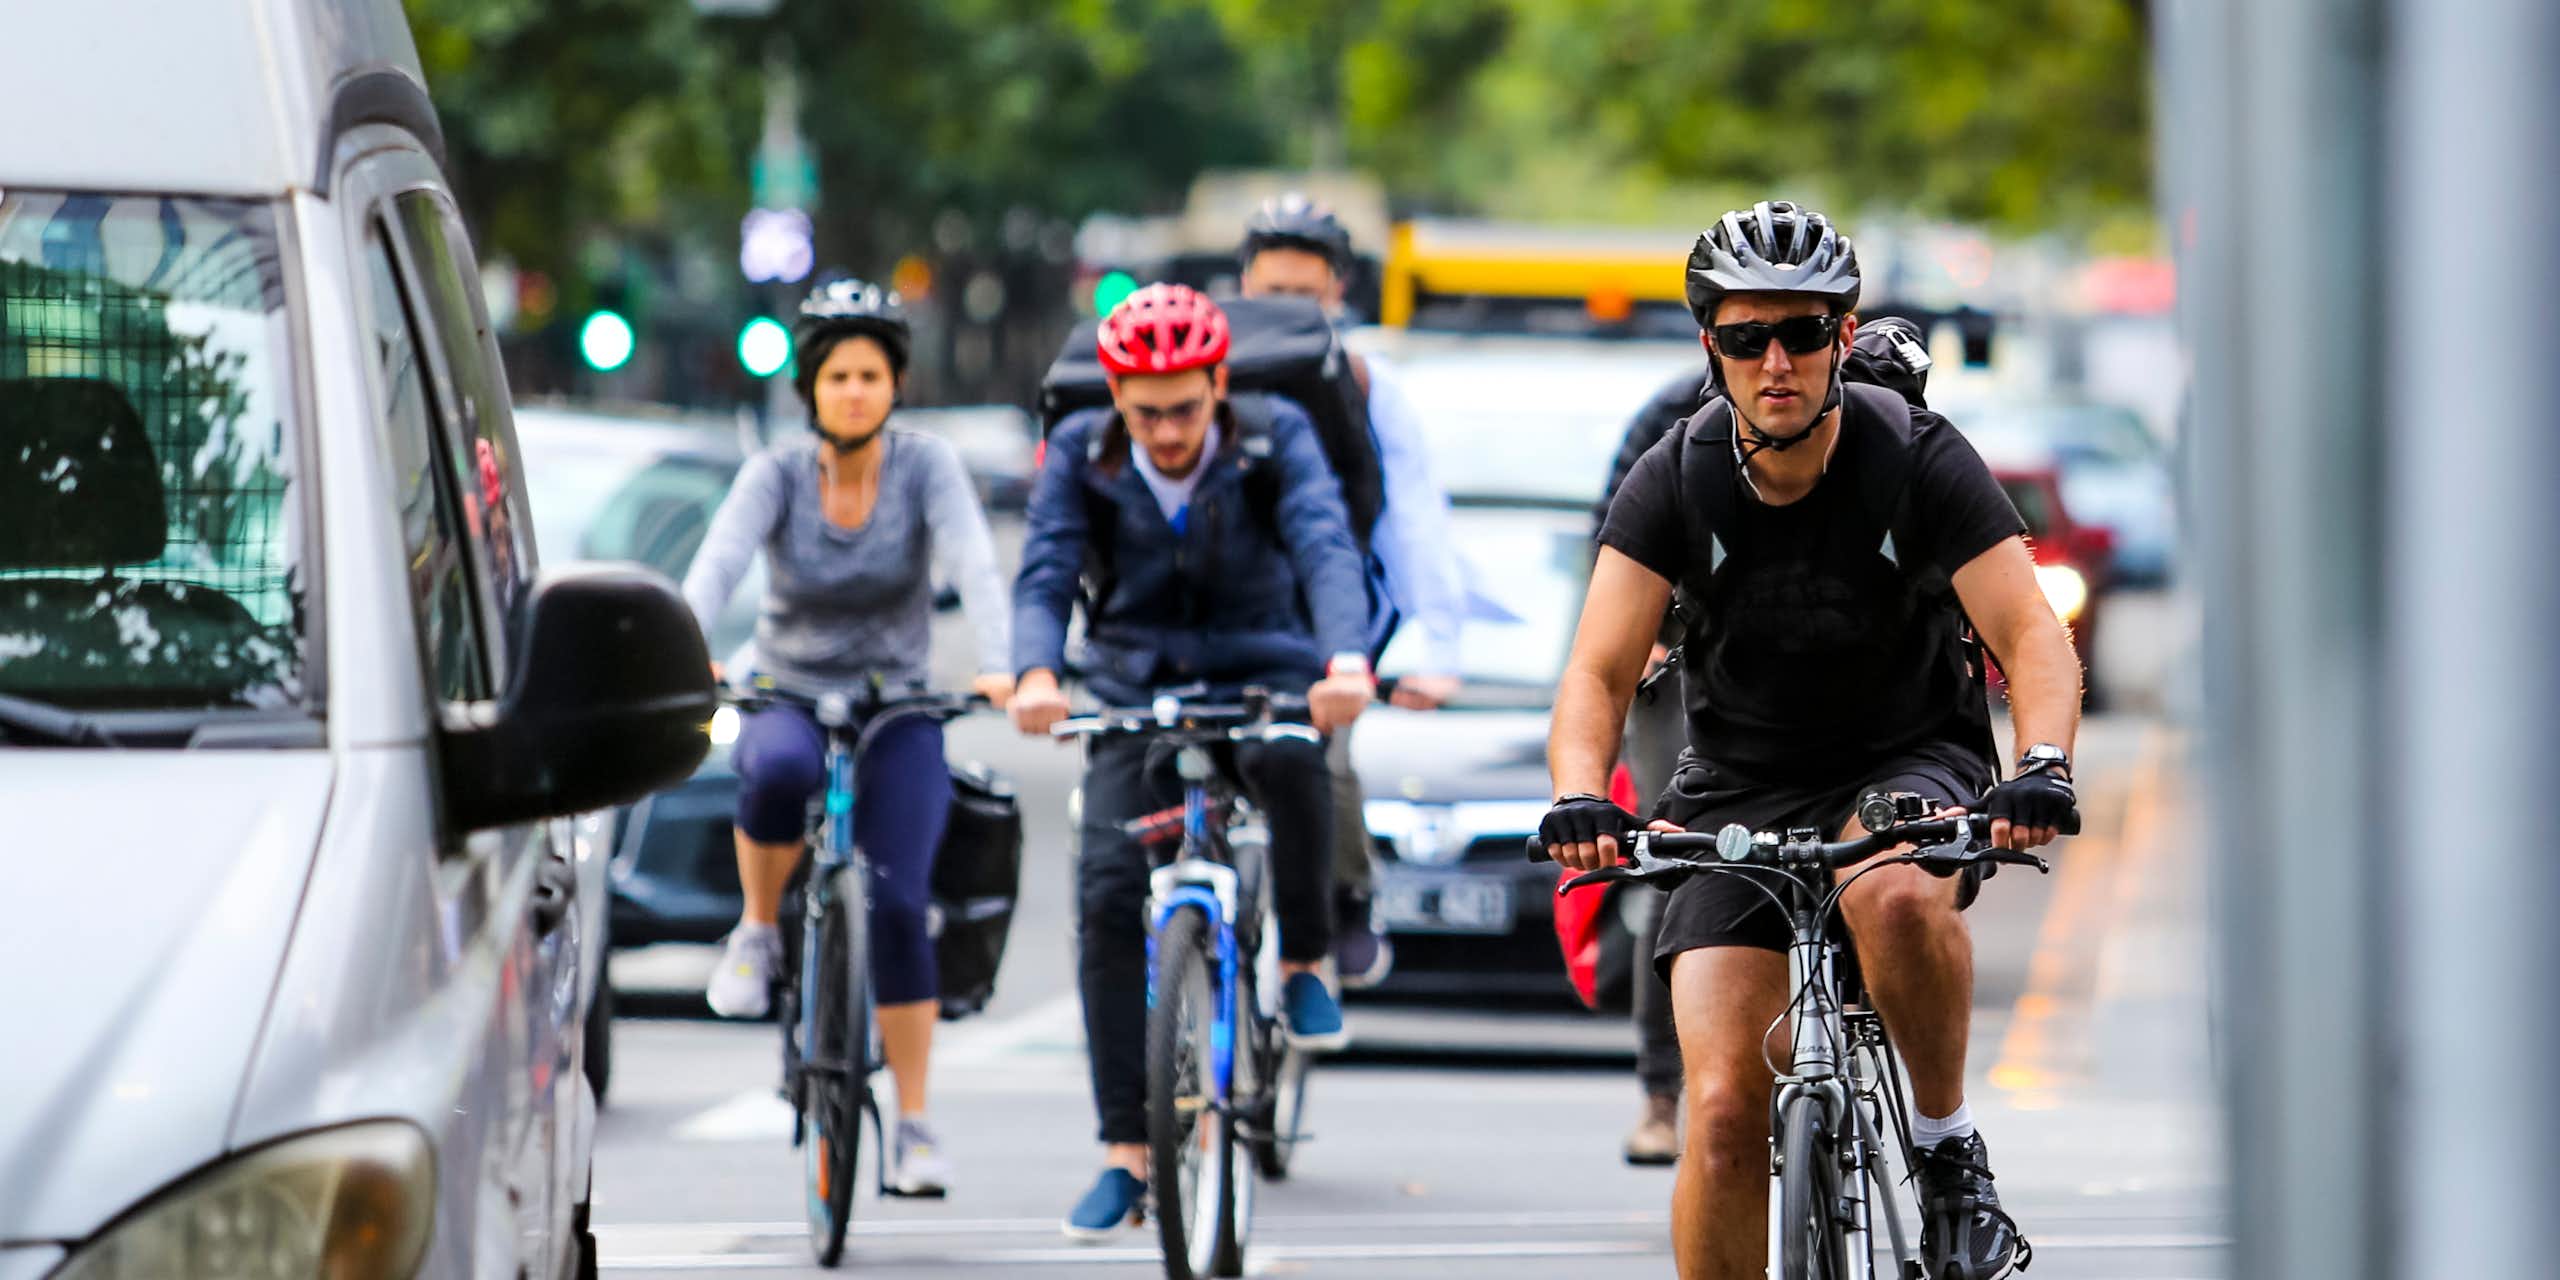 Cyclists commute among the traffic in Melbourne